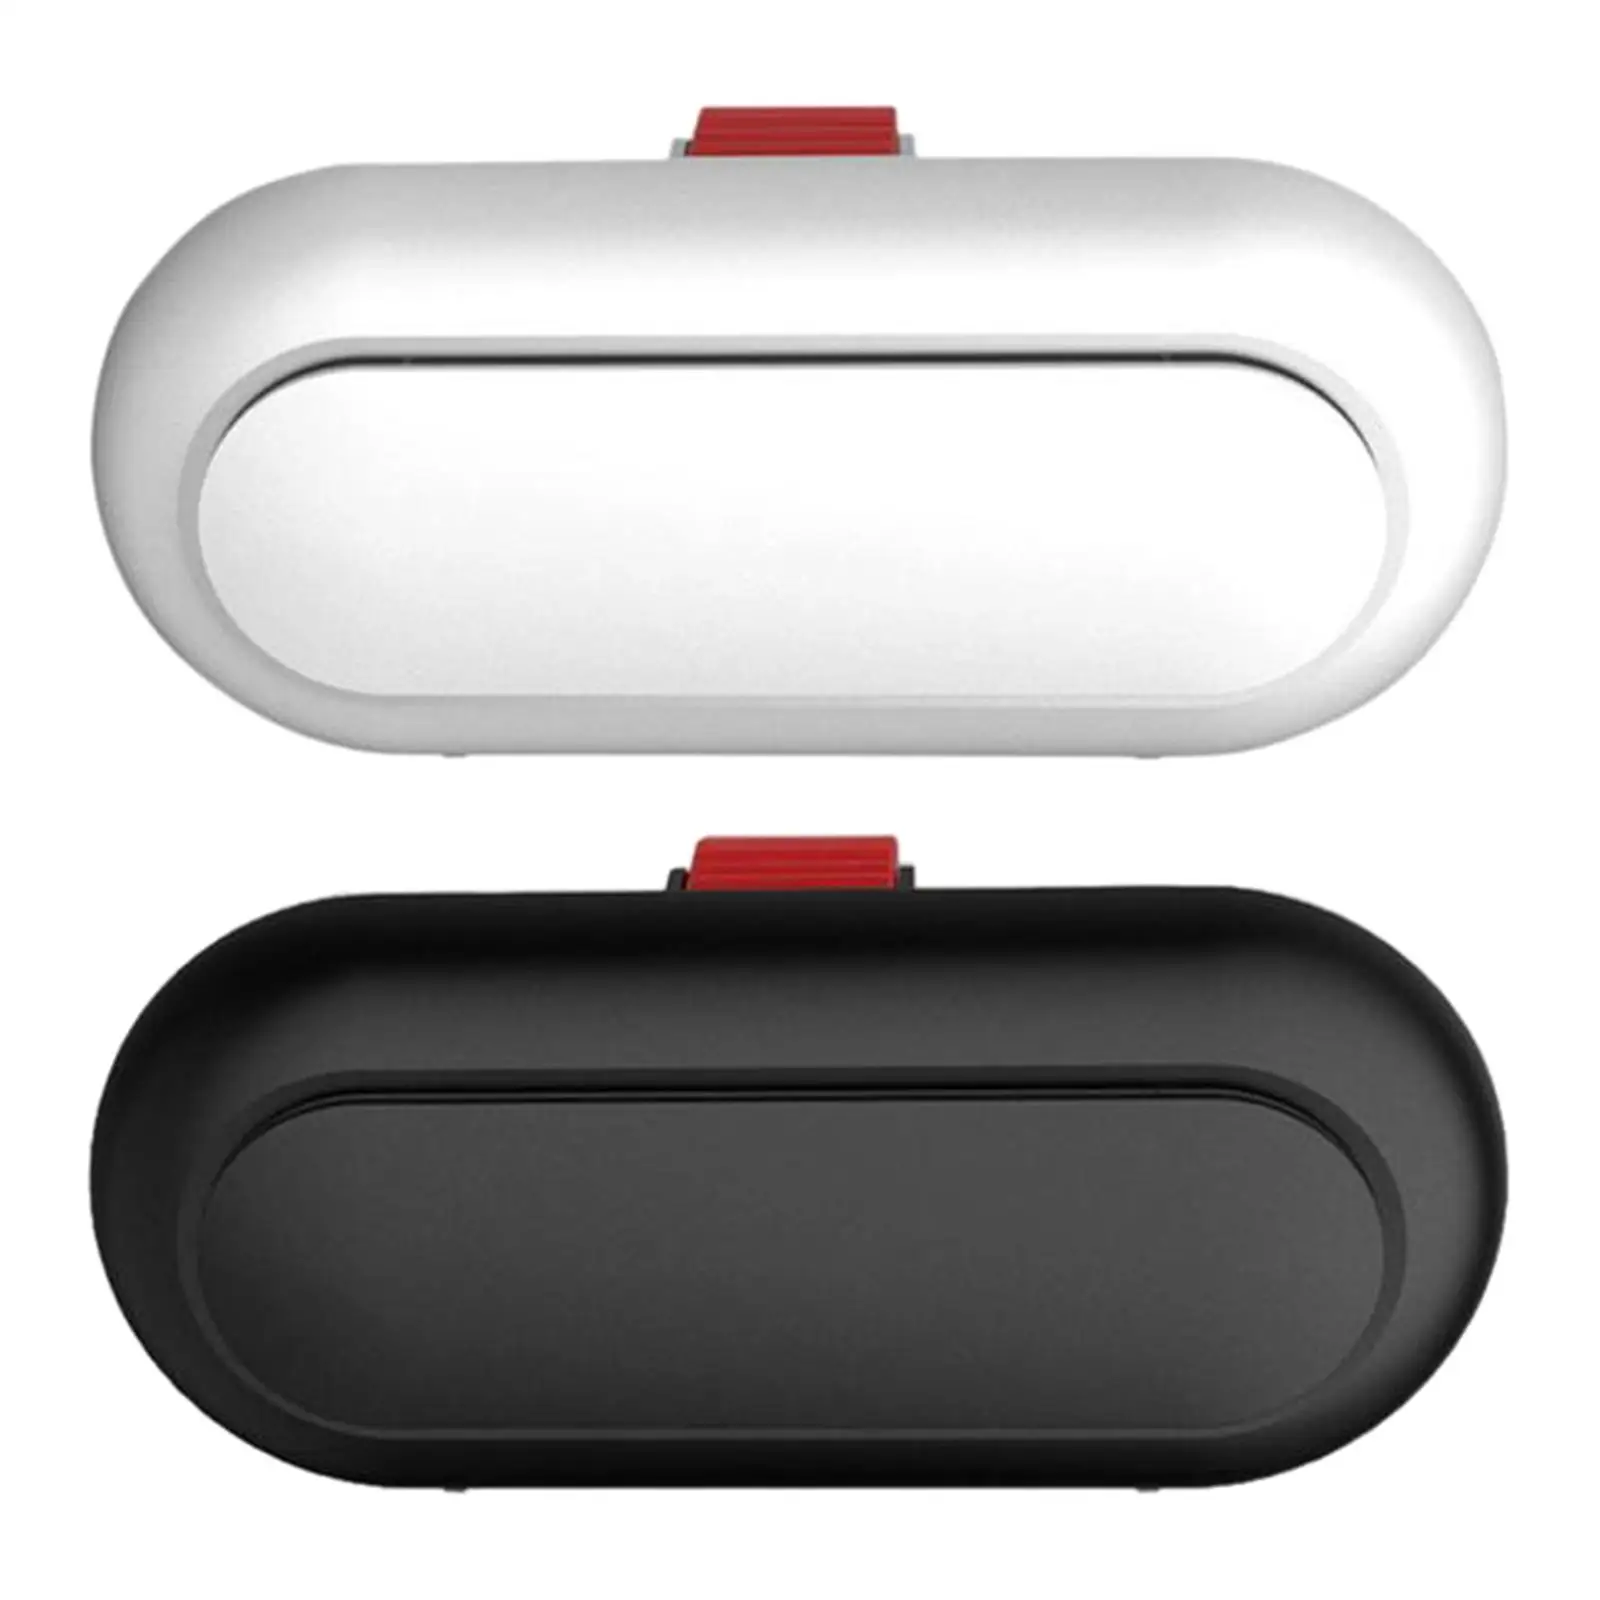 Car Interior Glasses Case Retractable Automotive Accessories Large Capacity ABS Electroplating Clip Holder